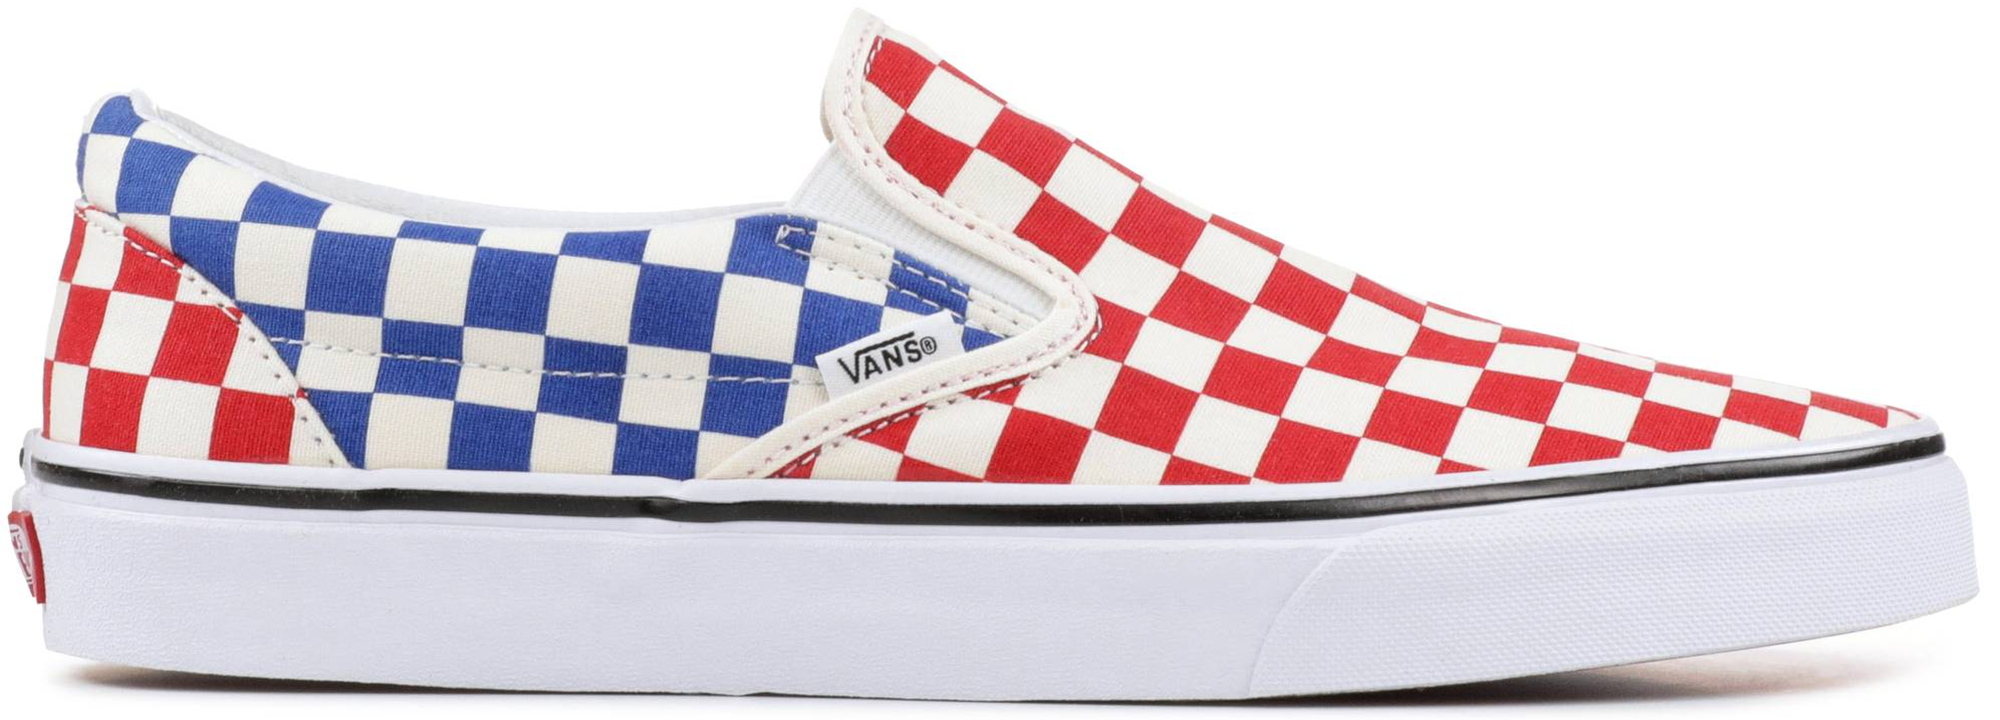 Vans Classic Slip-On Checkerboard Red 